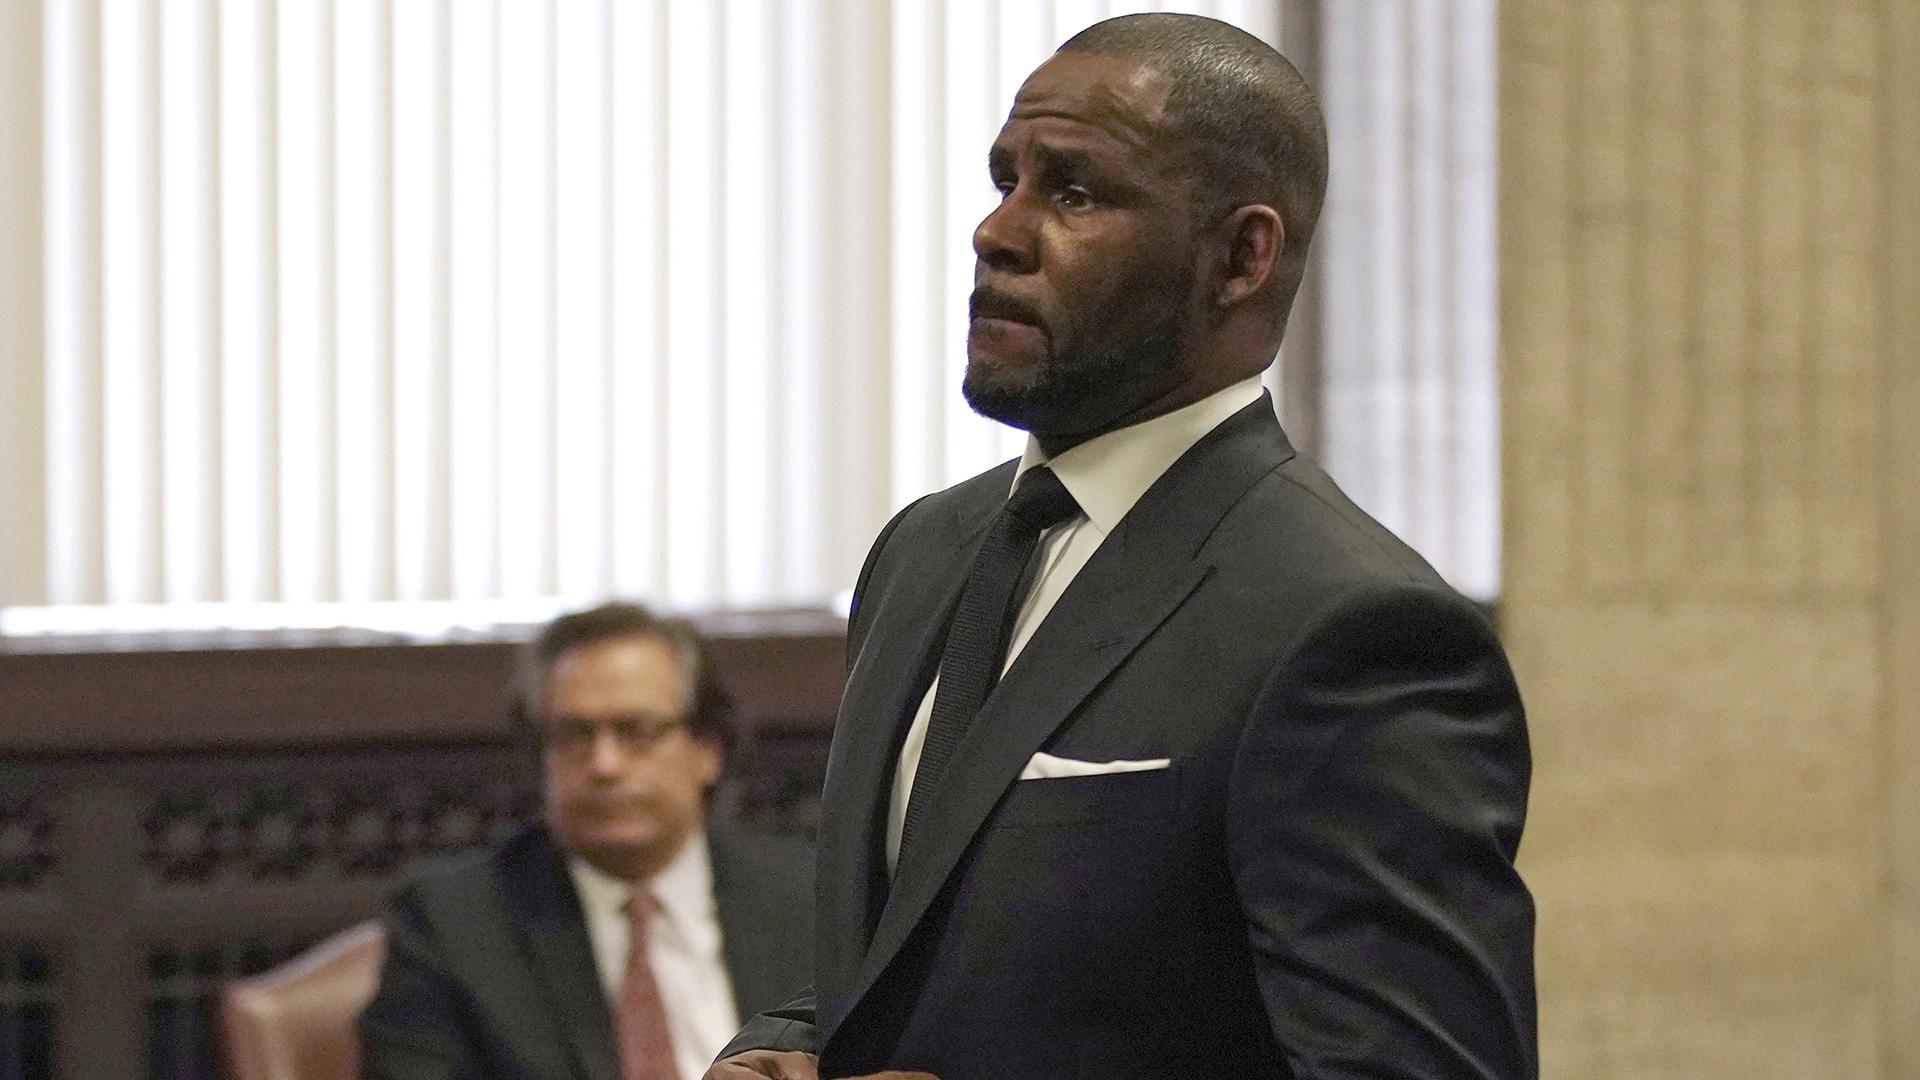 R. Kelly appears for a hearing at the Leighton Criminal Court Building on Friday, March 22, 2019 in Chicago. (E. Jason Wambsgans / Chicago Tribune via AP, Pool)